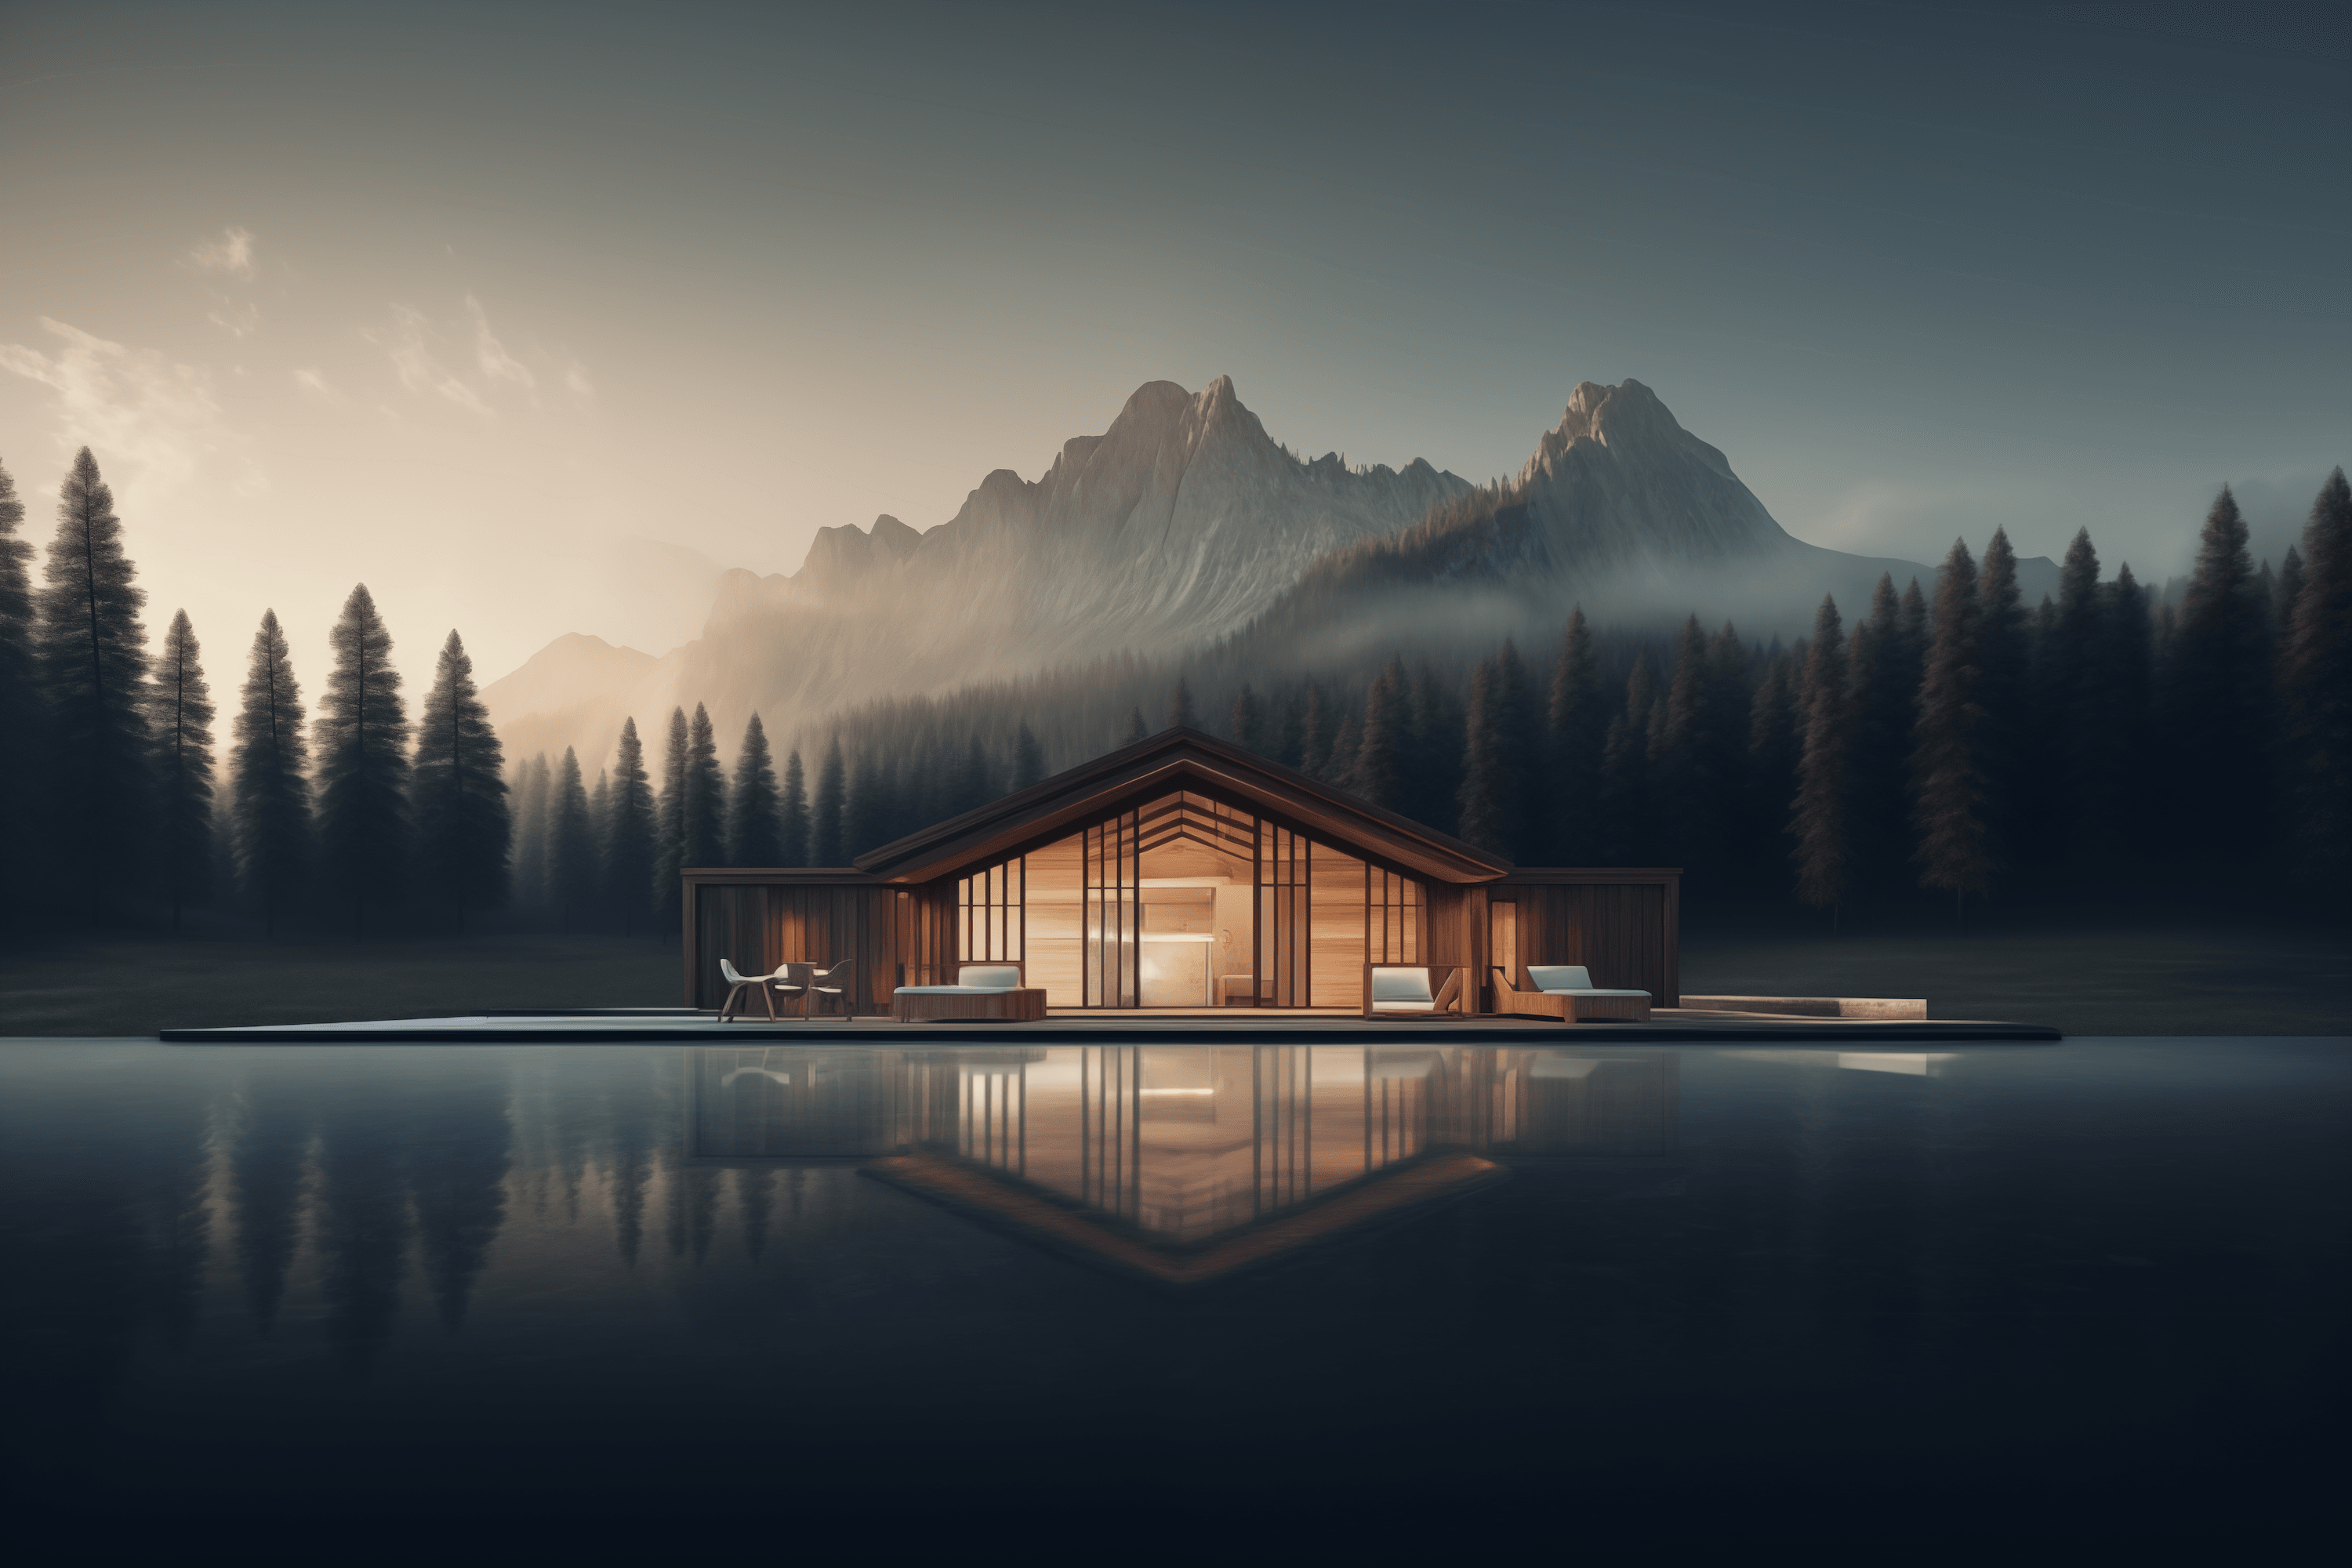 Mountains and forests with two cabins